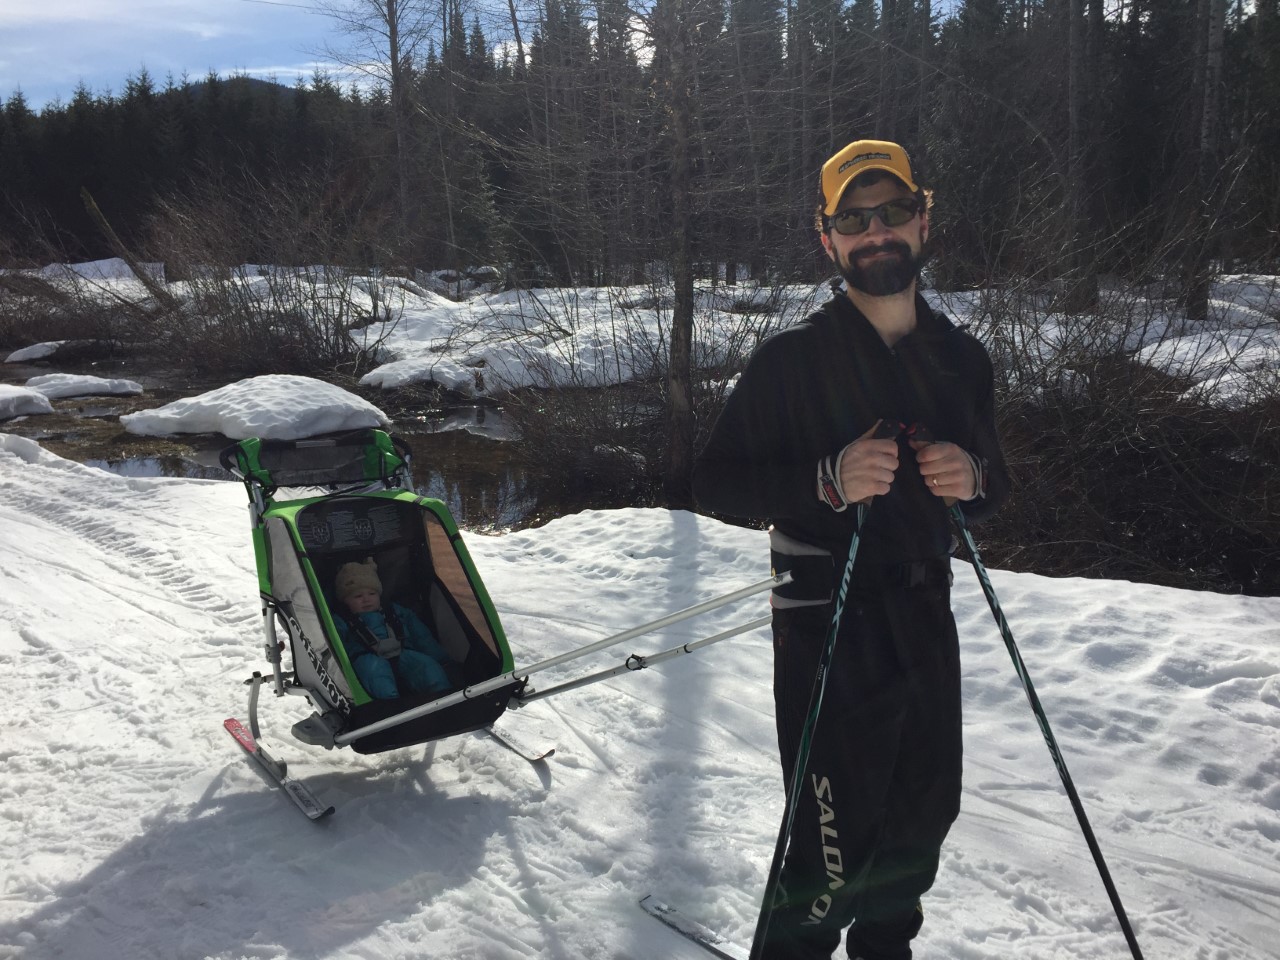 Kracht Overtreden slaaf Cross-Country Skiing With A Baby 101 — The Wee Wanderer